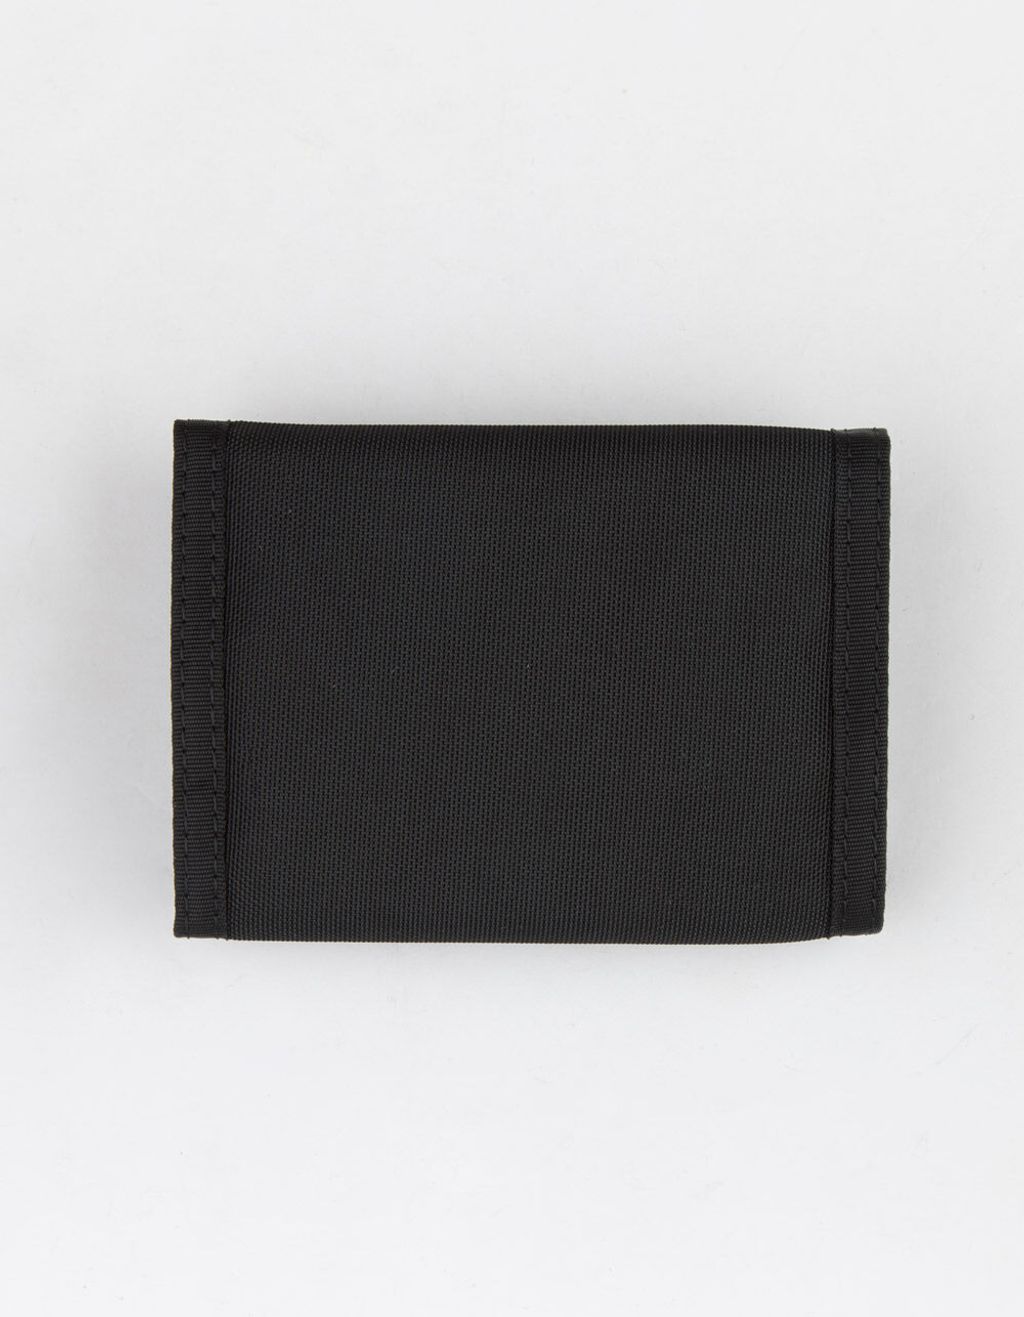 CHAMPION Trifold Wallet $25 to $10+tax 2